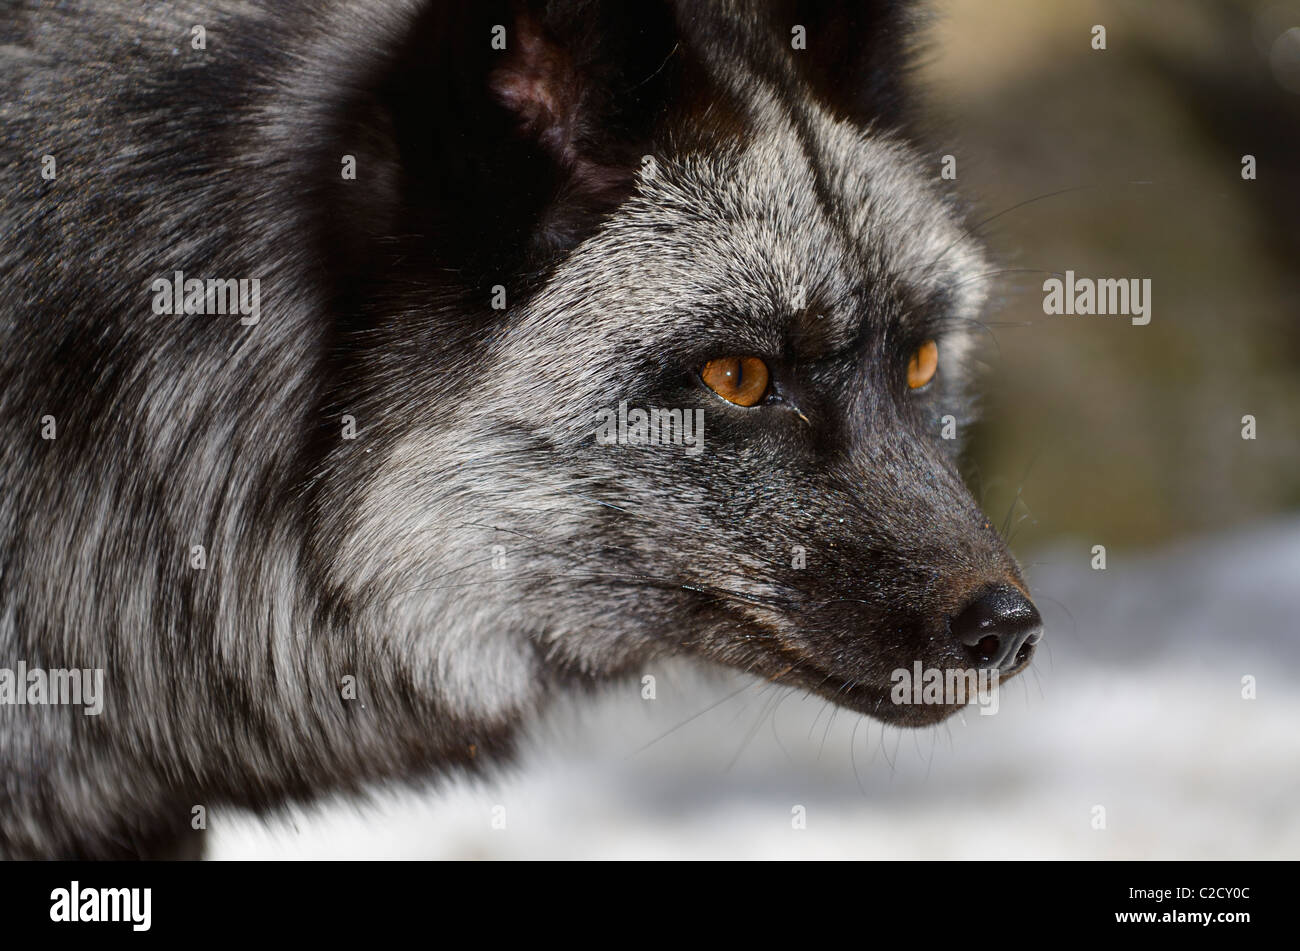 Close up of the face of a silver color phase Red Fox with black fur and orange eyes in a snow covered forest Muskoka Ontario Stock Photo